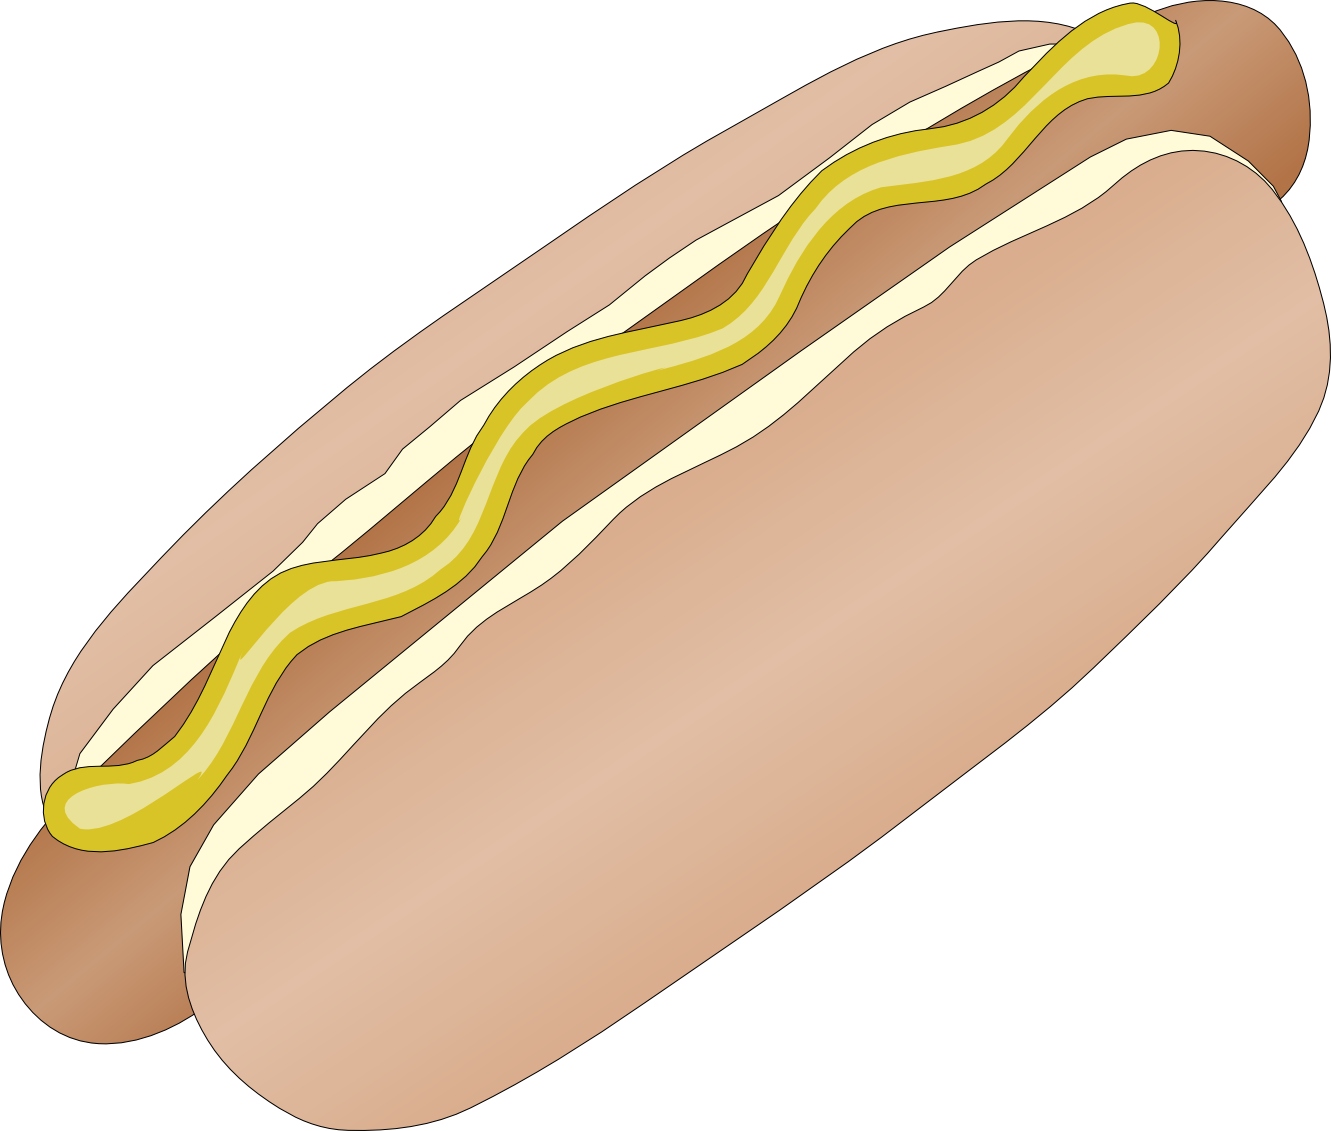 Hot Dog Images Free - ClipArt Best